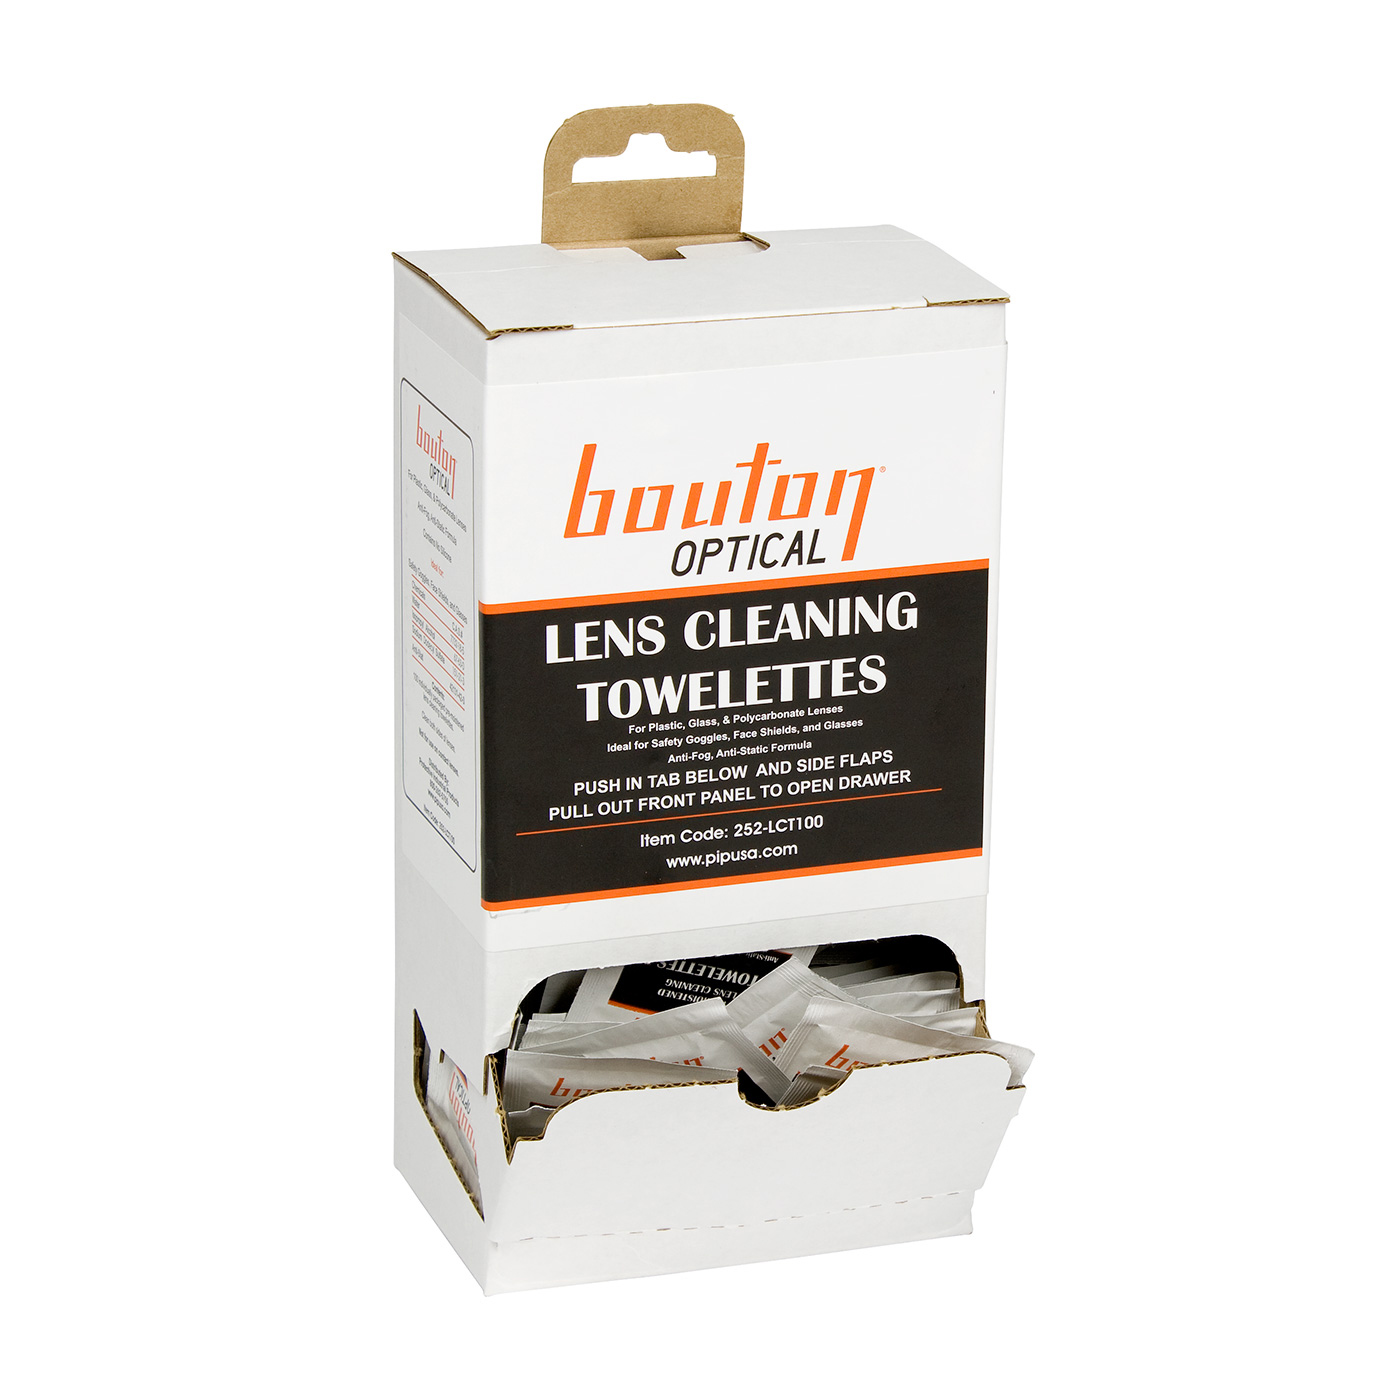 Bouton Optical Lens Cleaning Towelette Dispenser